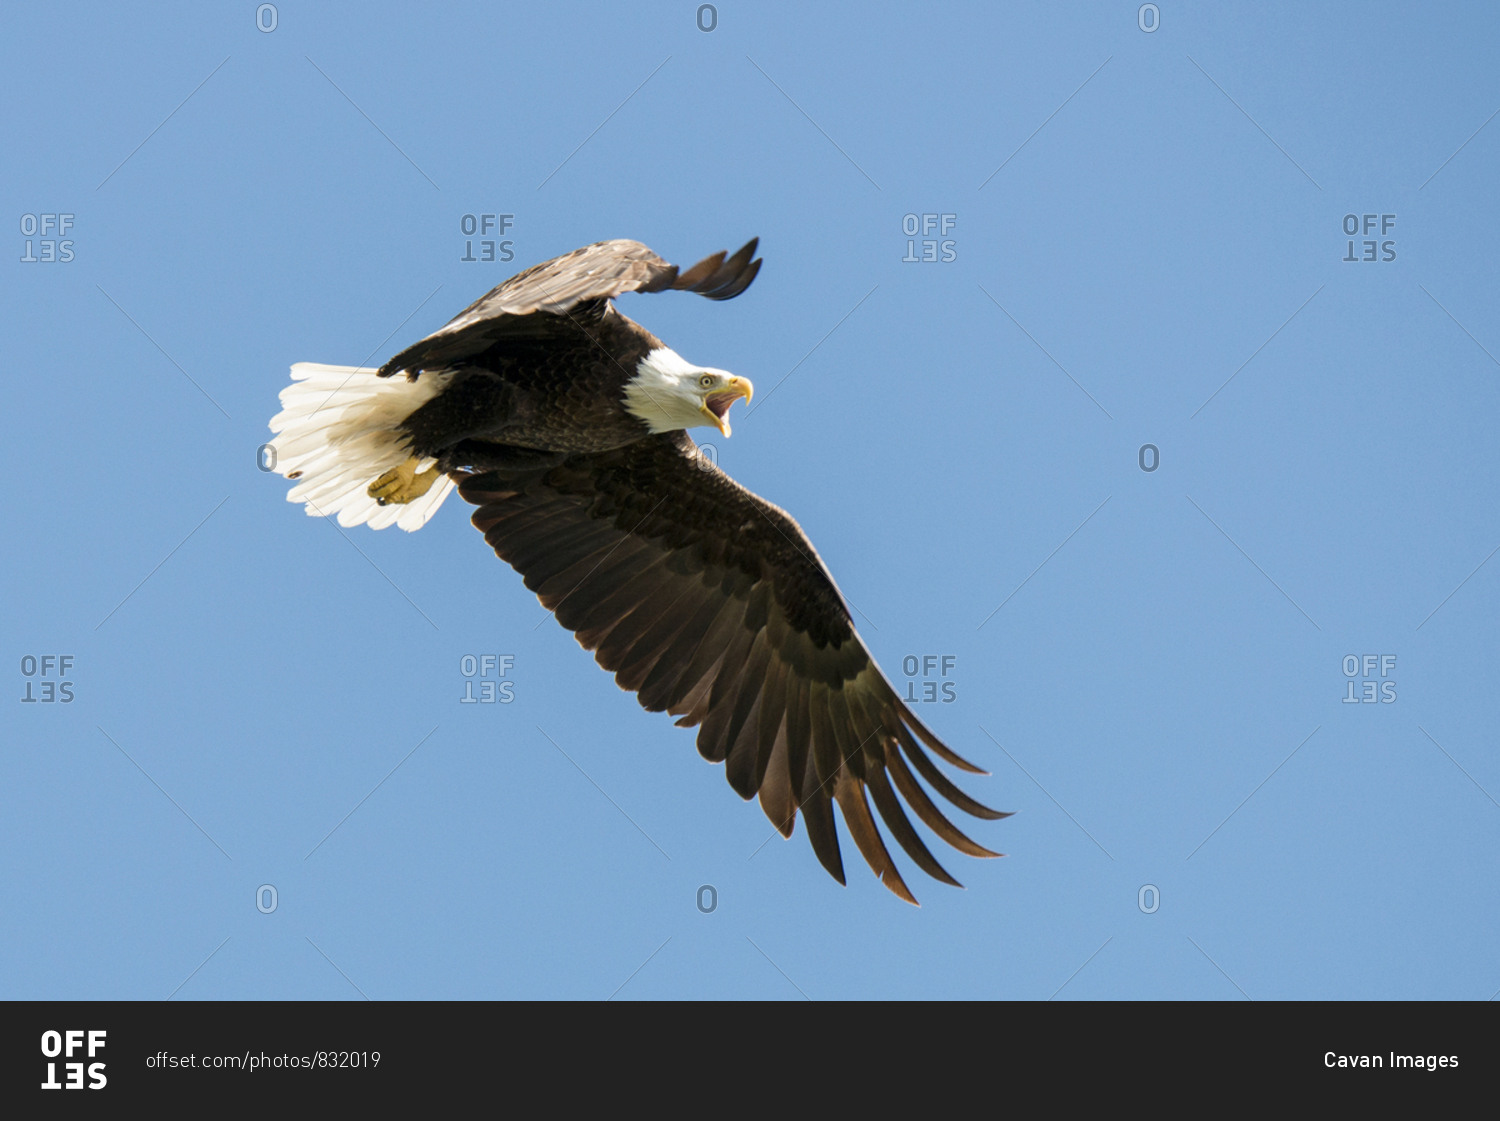 A bald eagle with its beak open flies with wings open.